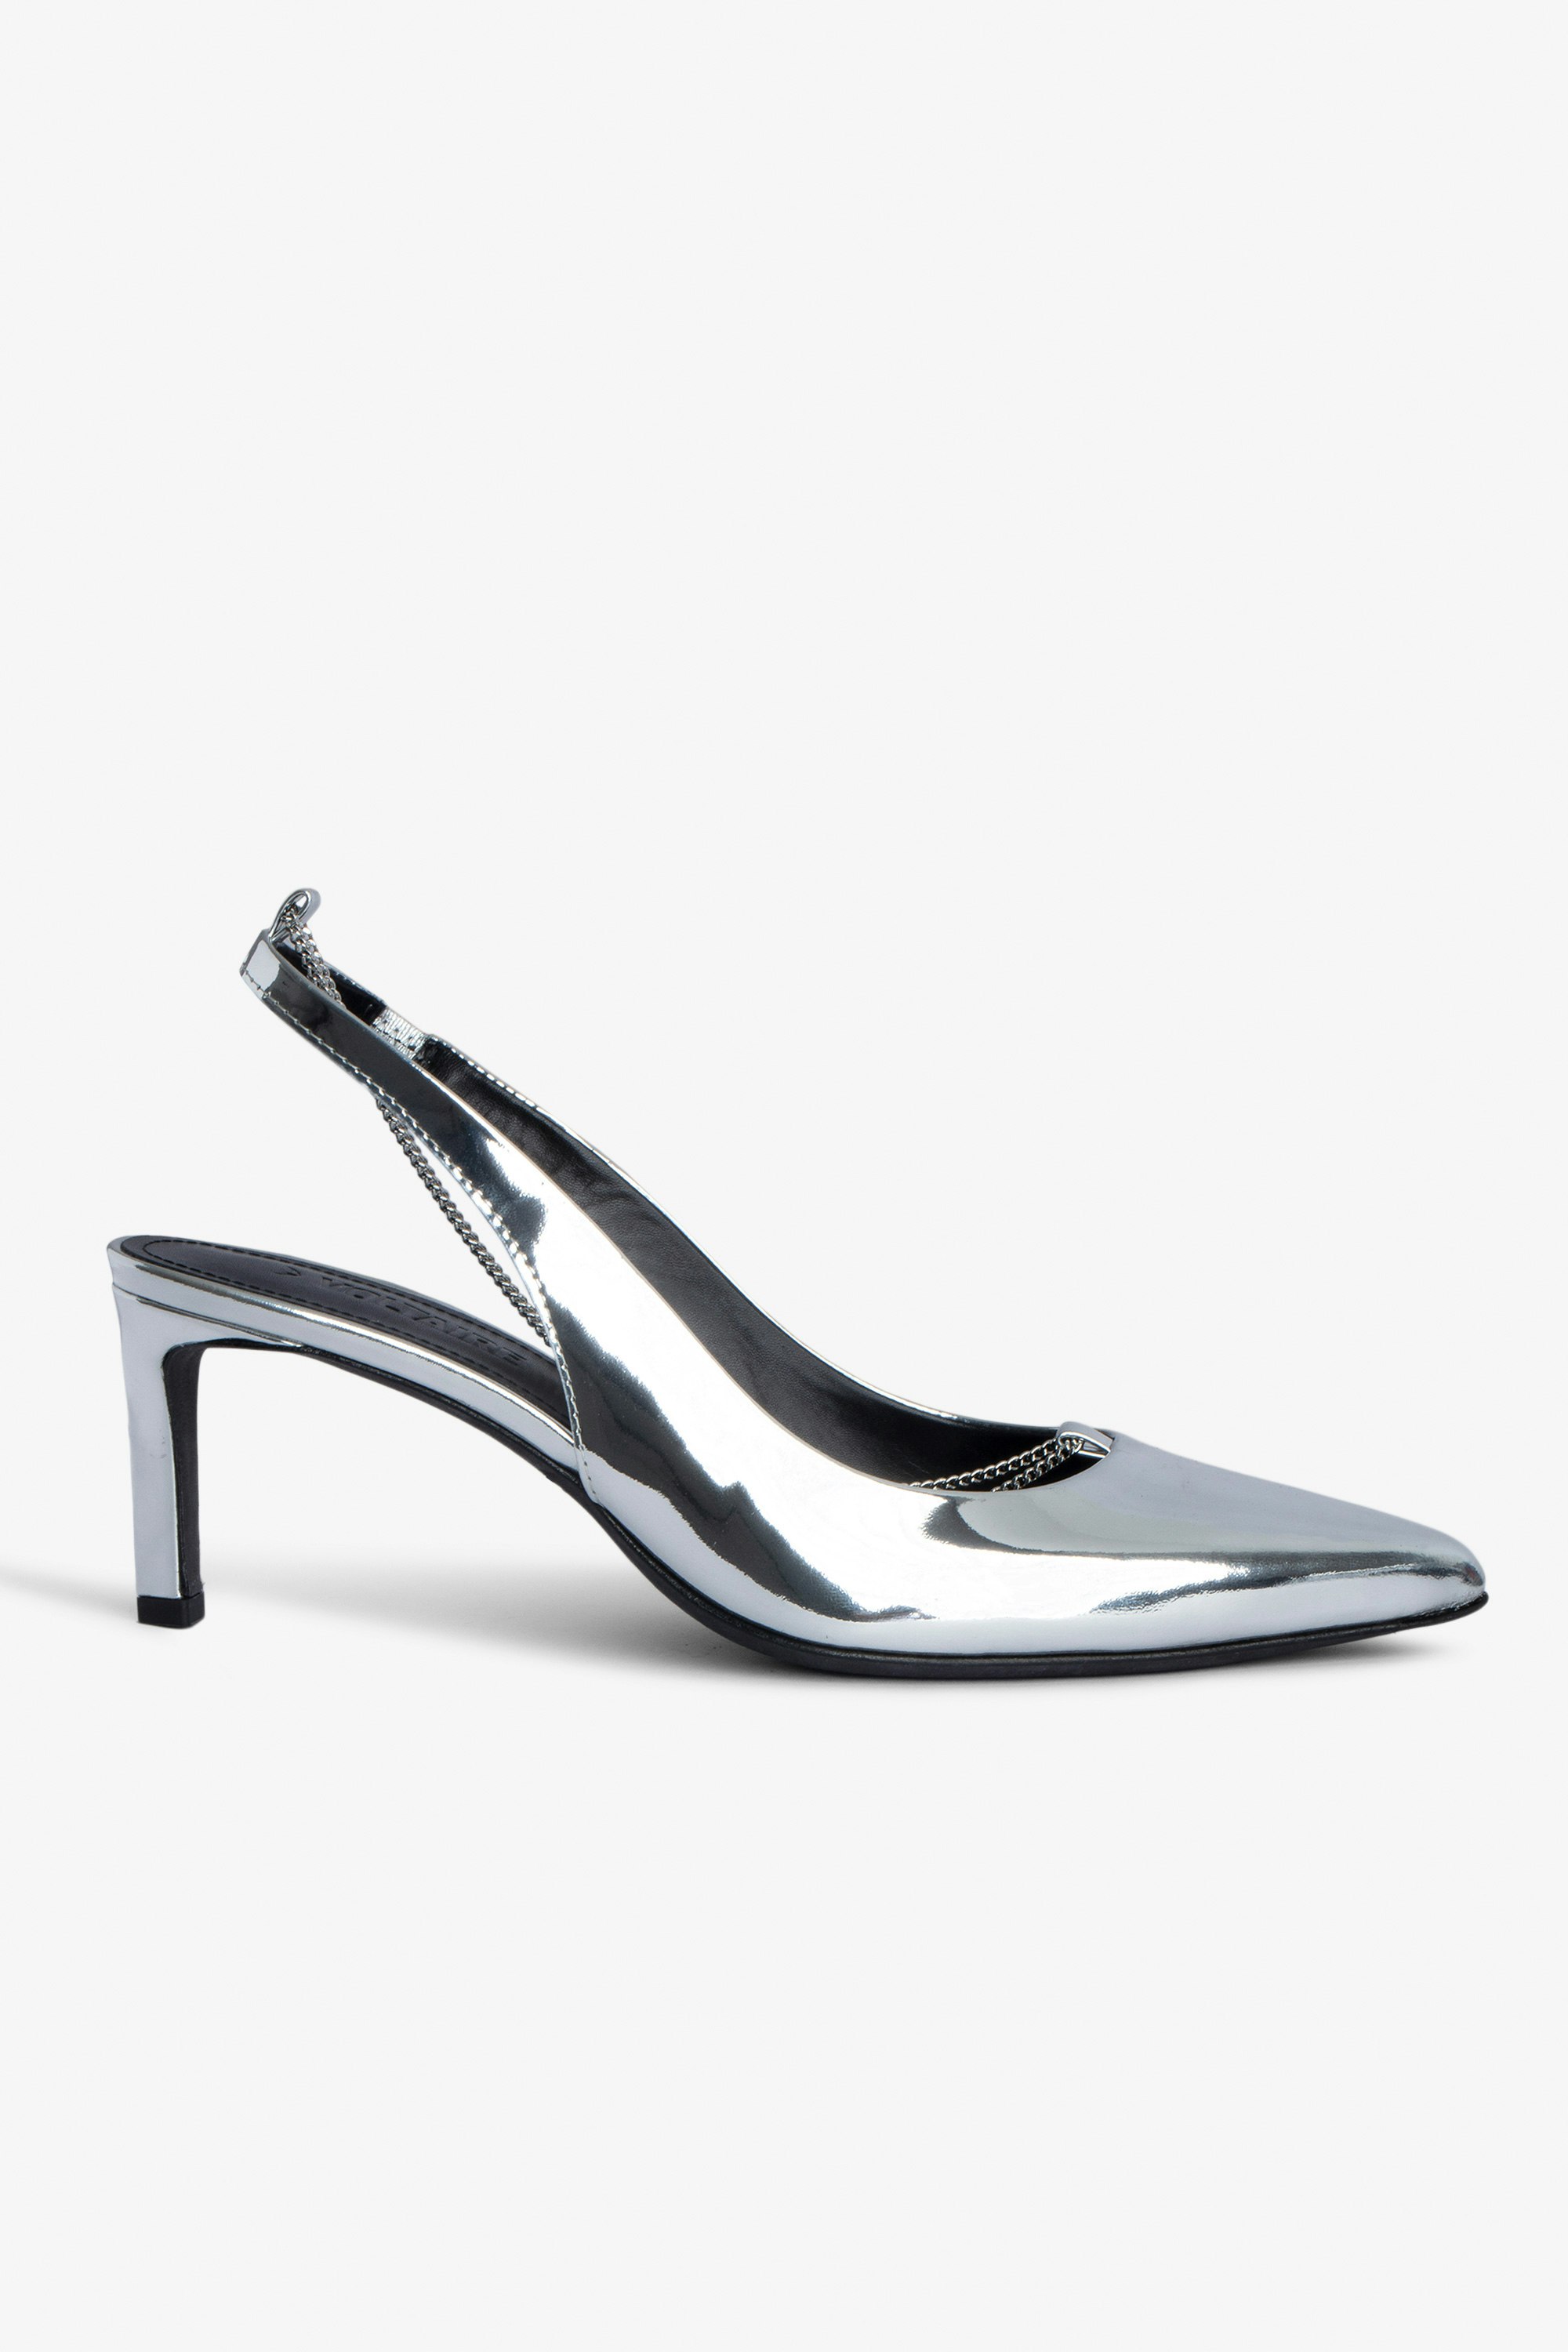 First Night Court Shoes - Silver patent leather court shoes with leather strap and metal chain.